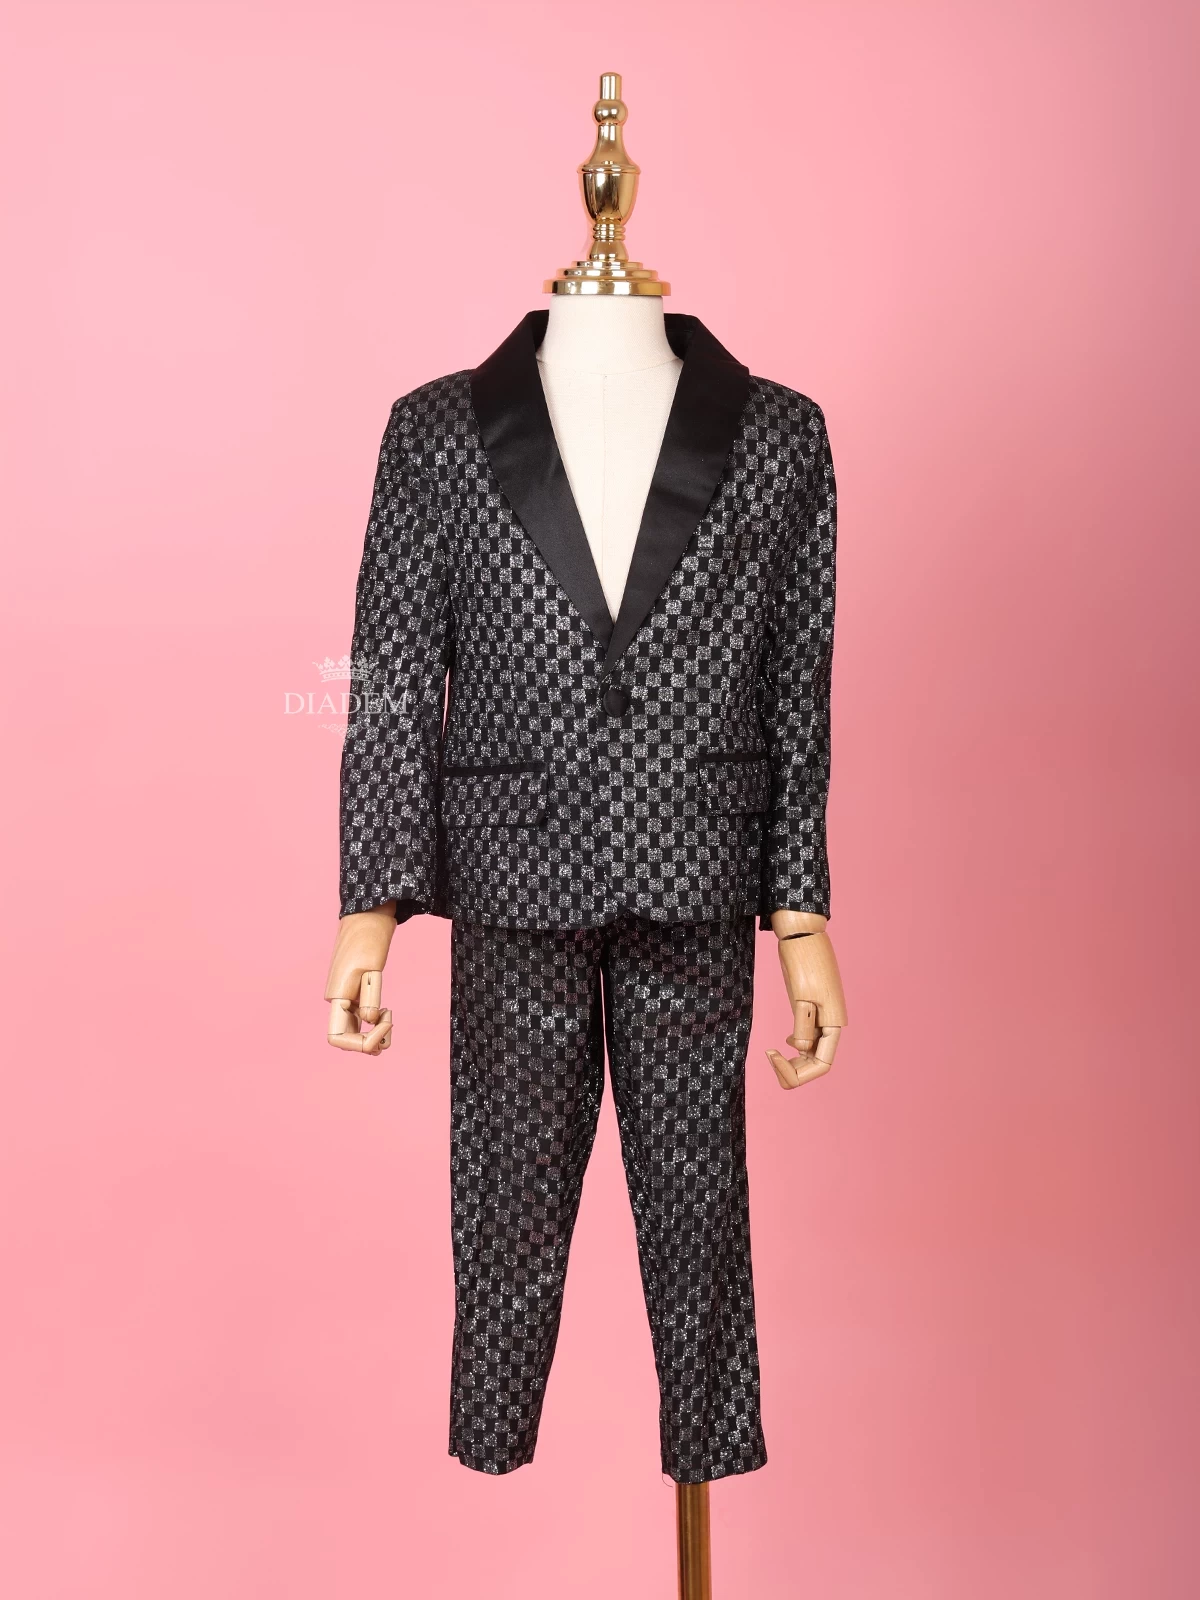 Black and Silver Shimmer Tuxedo with Checked Pattern Coat Suit for Boys